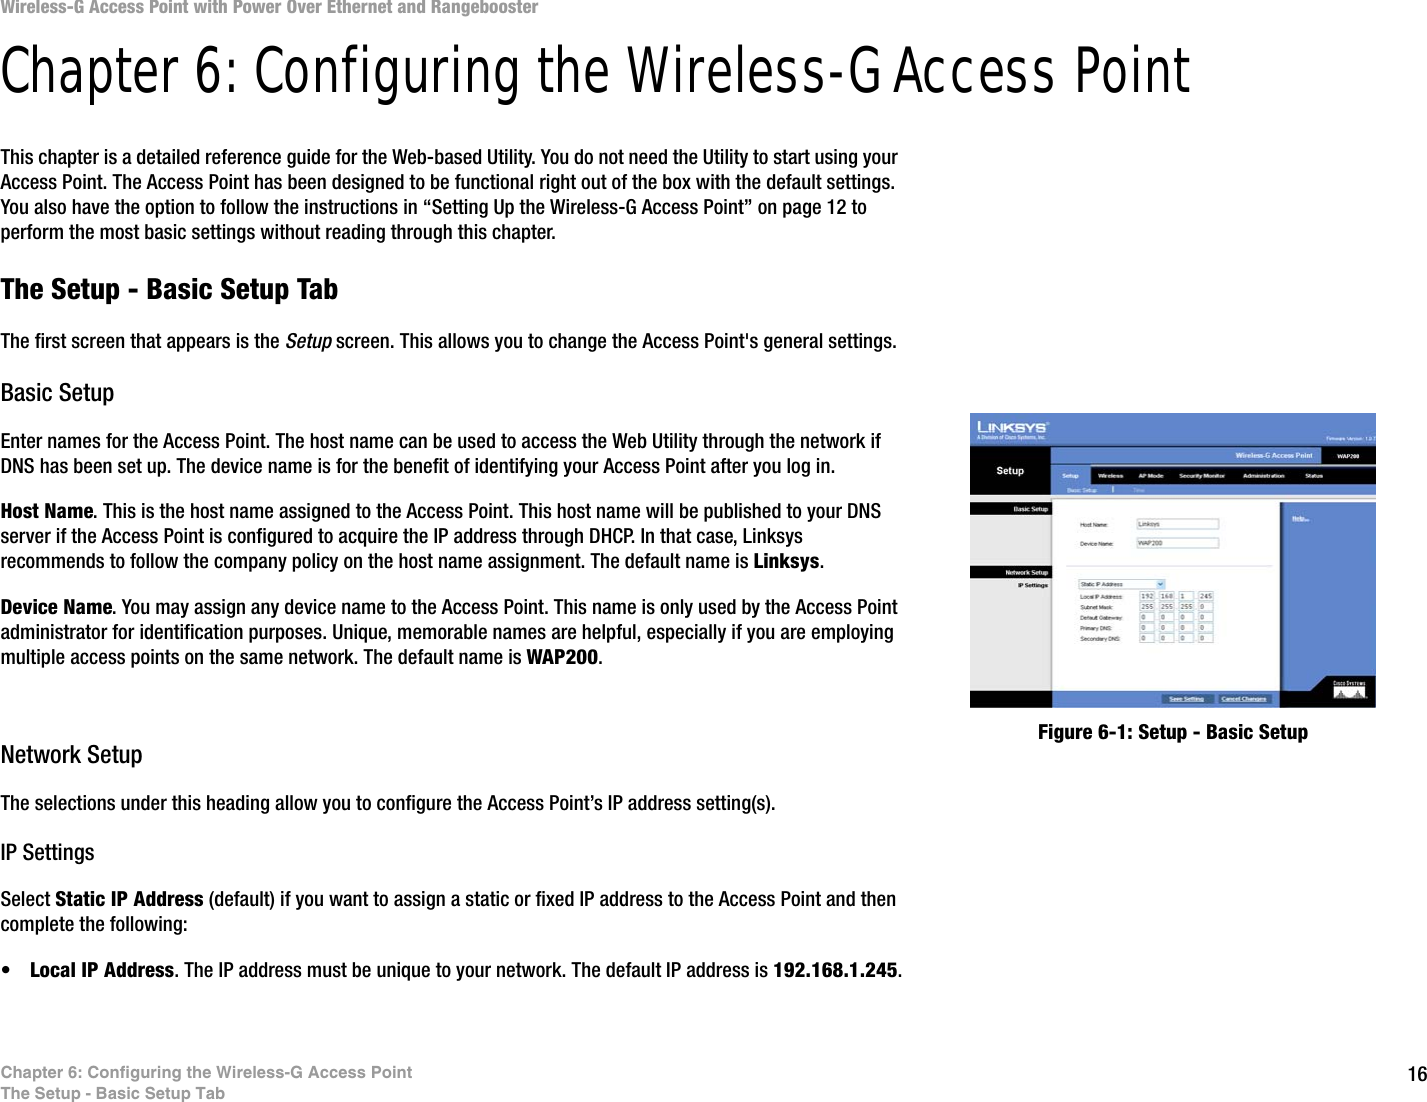 16Chapter 6: Configuring the Wireless-G Access PointThe Setup - Basic Setup TabWireless-G Access Point with Power Over Ethernet and RangeboosterChapter 6: Configuring the Wireless-G Access PointThis chapter is a detailed reference guide for the Web-based Utility. You do not need the Utility to start using your Access Point. The Access Point has been designed to be functional right out of the box with the default settings. You also have the option to follow the instructions in “Setting Up the Wireless-G Access Point” on page 12 to perform the most basic settings without reading through this chapter. The Setup - Basic Setup TabThe first screen that appears is the Setup screen. This allows you to change the Access Point&apos;s general settings.Basic SetupEnter names for the Access Point. The host name can be used to access the Web Utility through the network if DNS has been set up. The device name is for the benefit of identifying your Access Point after you log in.Host Name. This is the host name assigned to the Access Point. This host name will be published to your DNS server if the Access Point is configured to acquire the IP address through DHCP. In that case, Linksys recommends to follow the company policy on the host name assignment. The default name is Linksys.Device Name. You may assign any device name to the Access Point. This name is only used by the Access Point administrator for identification purposes. Unique, memorable names are helpful, especially if you are employing multiple access points on the same network. The default name is WAP200.Network SetupThe selections under this heading allow you to configure the Access Point’s IP address setting(s).IP SettingsSelect Static IP Address (default) if you want to assign a static or fixed IP address to the Access Point and then complete the following:•Local IP Address. The IP address must be unique to your network. The default IP address is 192.168.1.245.Figure 6-1: Setup - Basic Setup